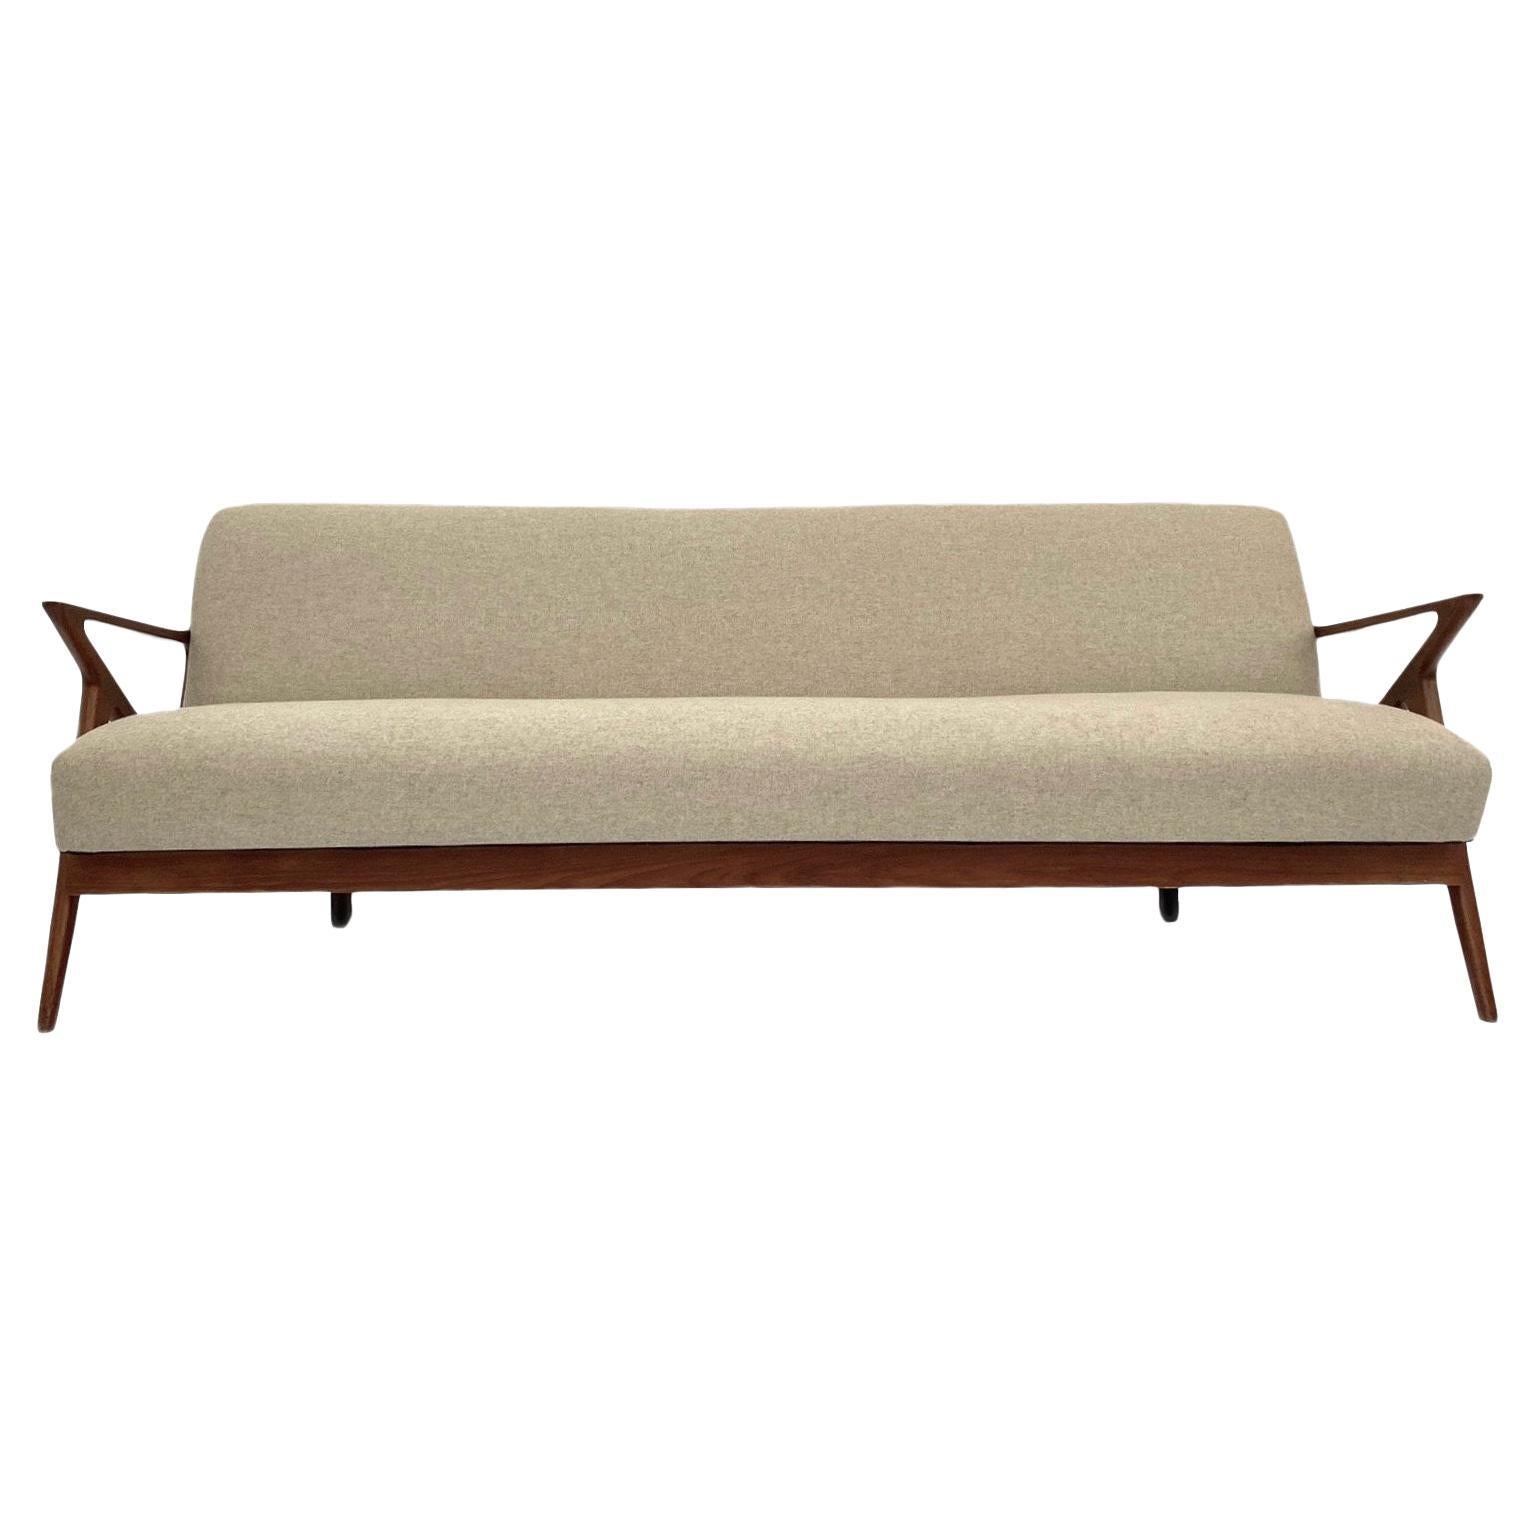 Poul Jensen Model 'Z' Cream Wool and Teak 3 Seater Sofabed for Selig Ope Danish